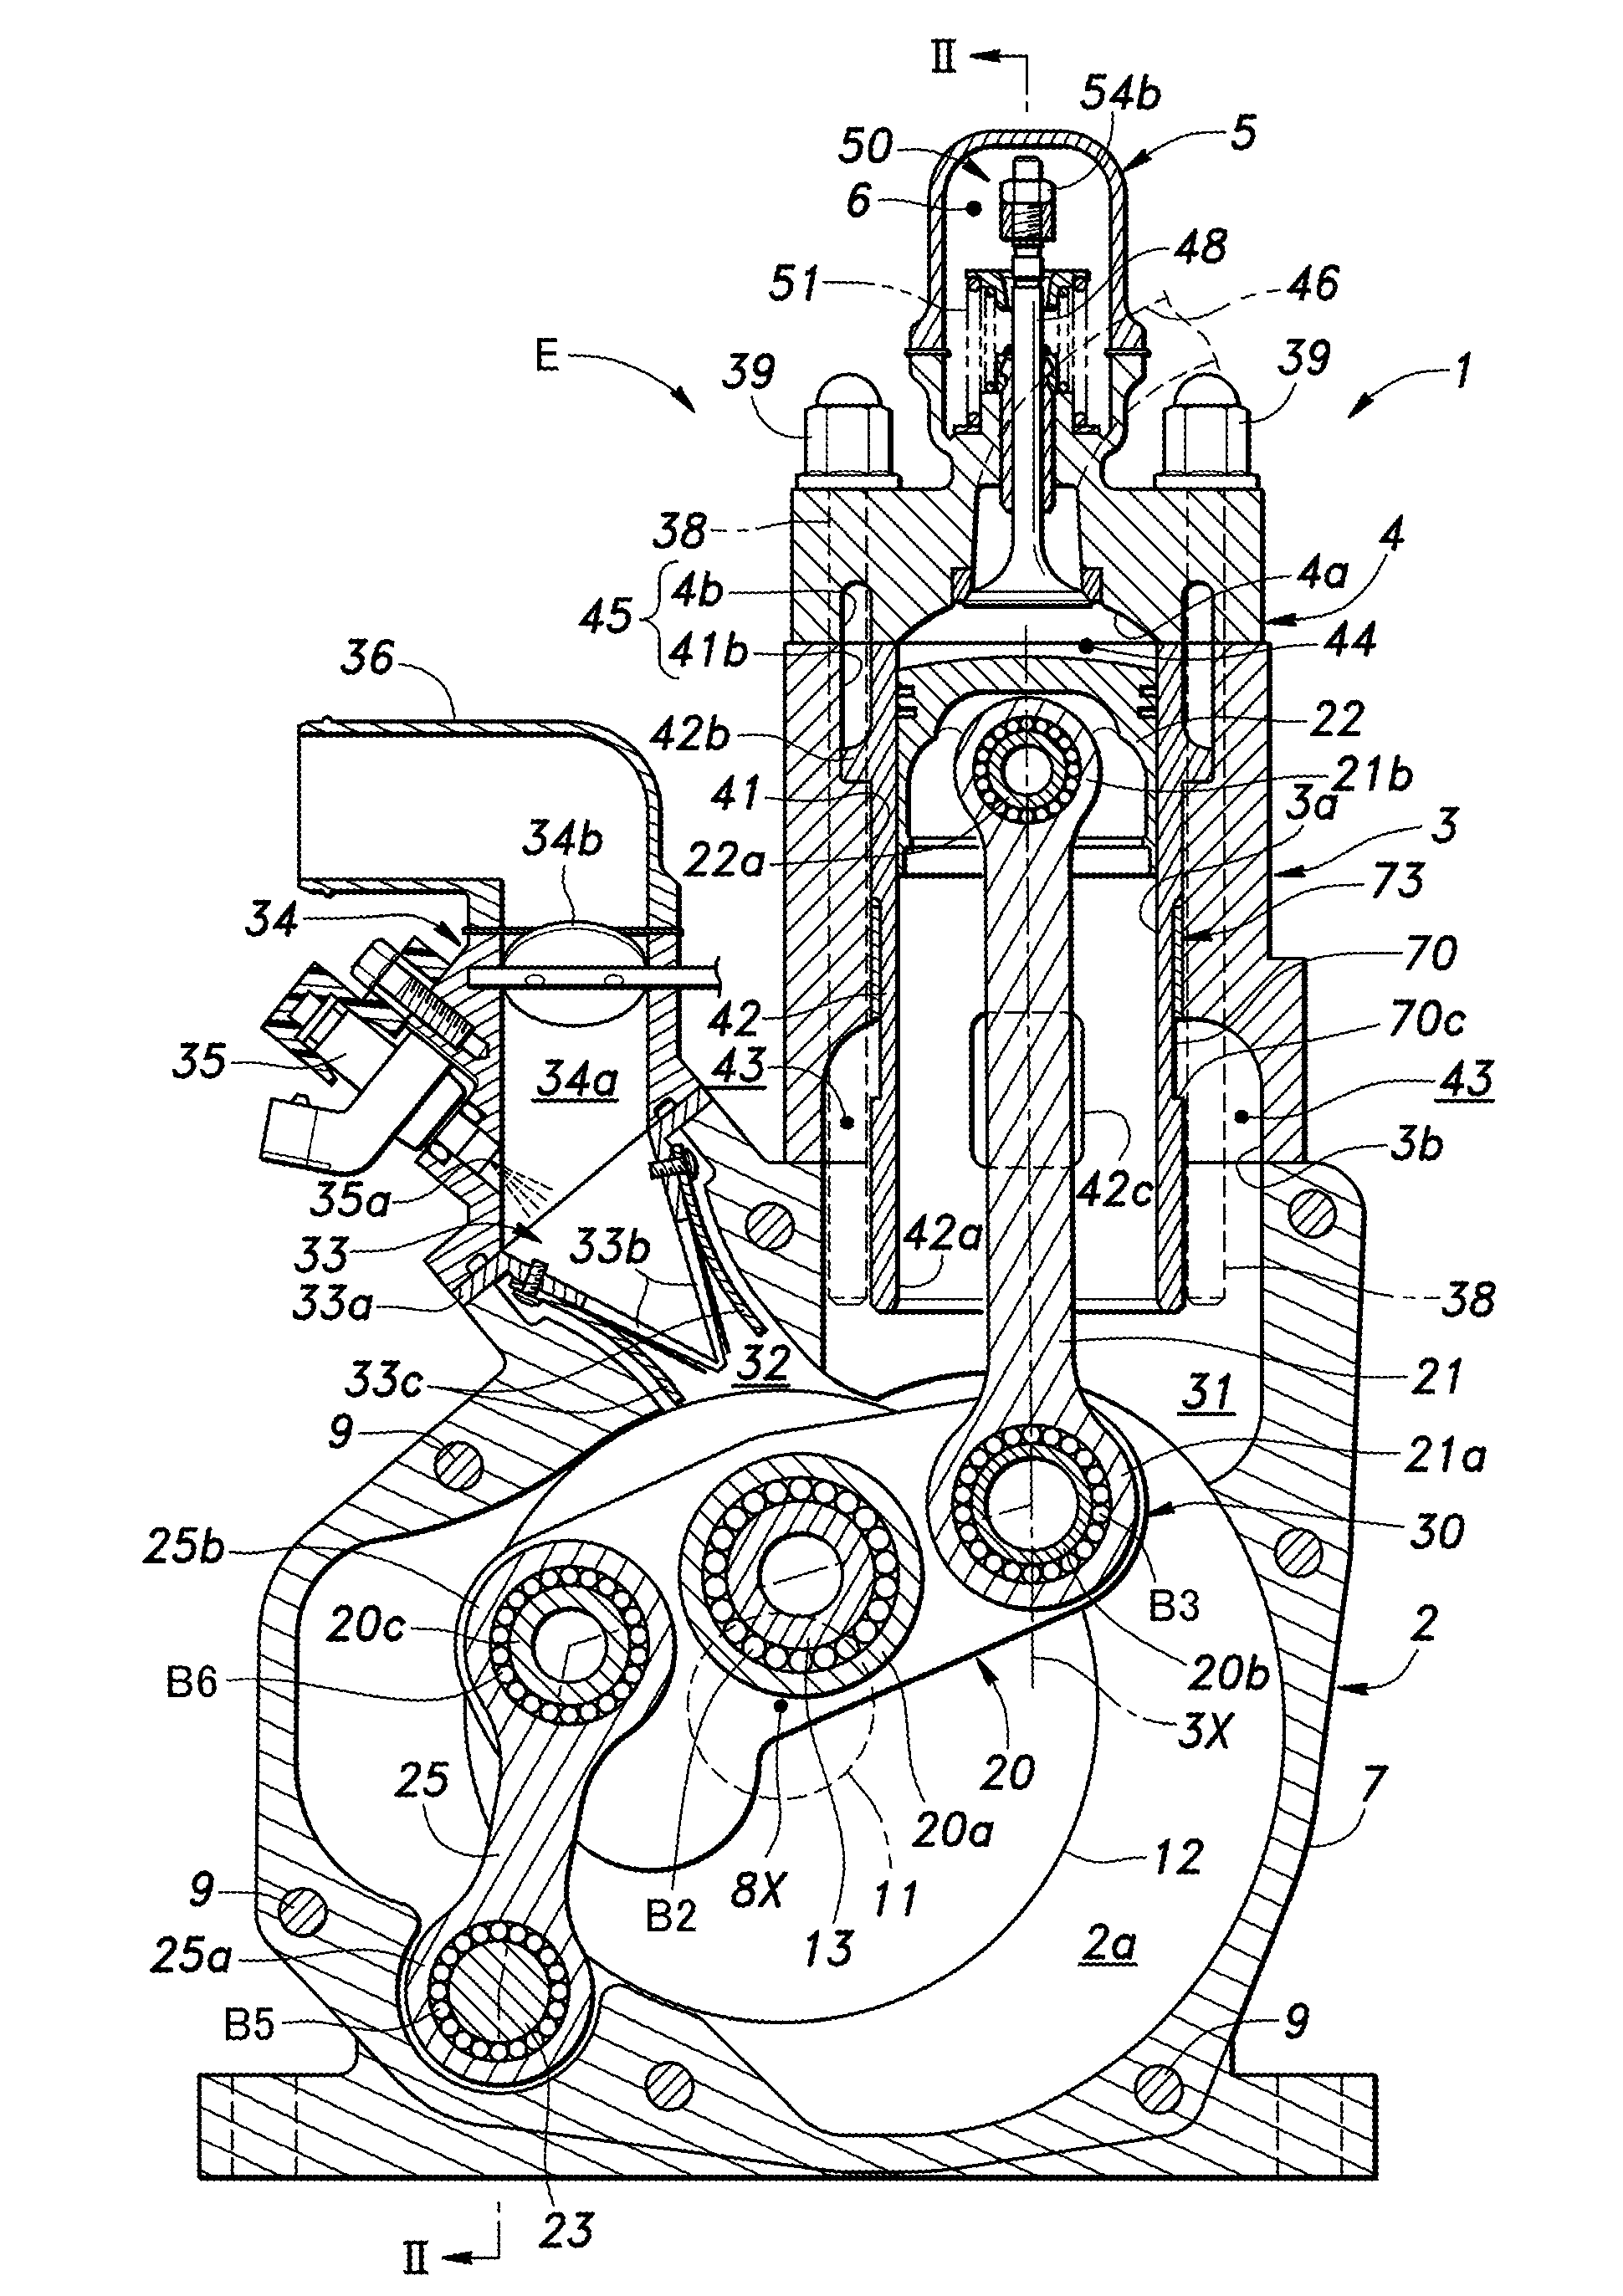 Two-stroke engine with variable scavenging port